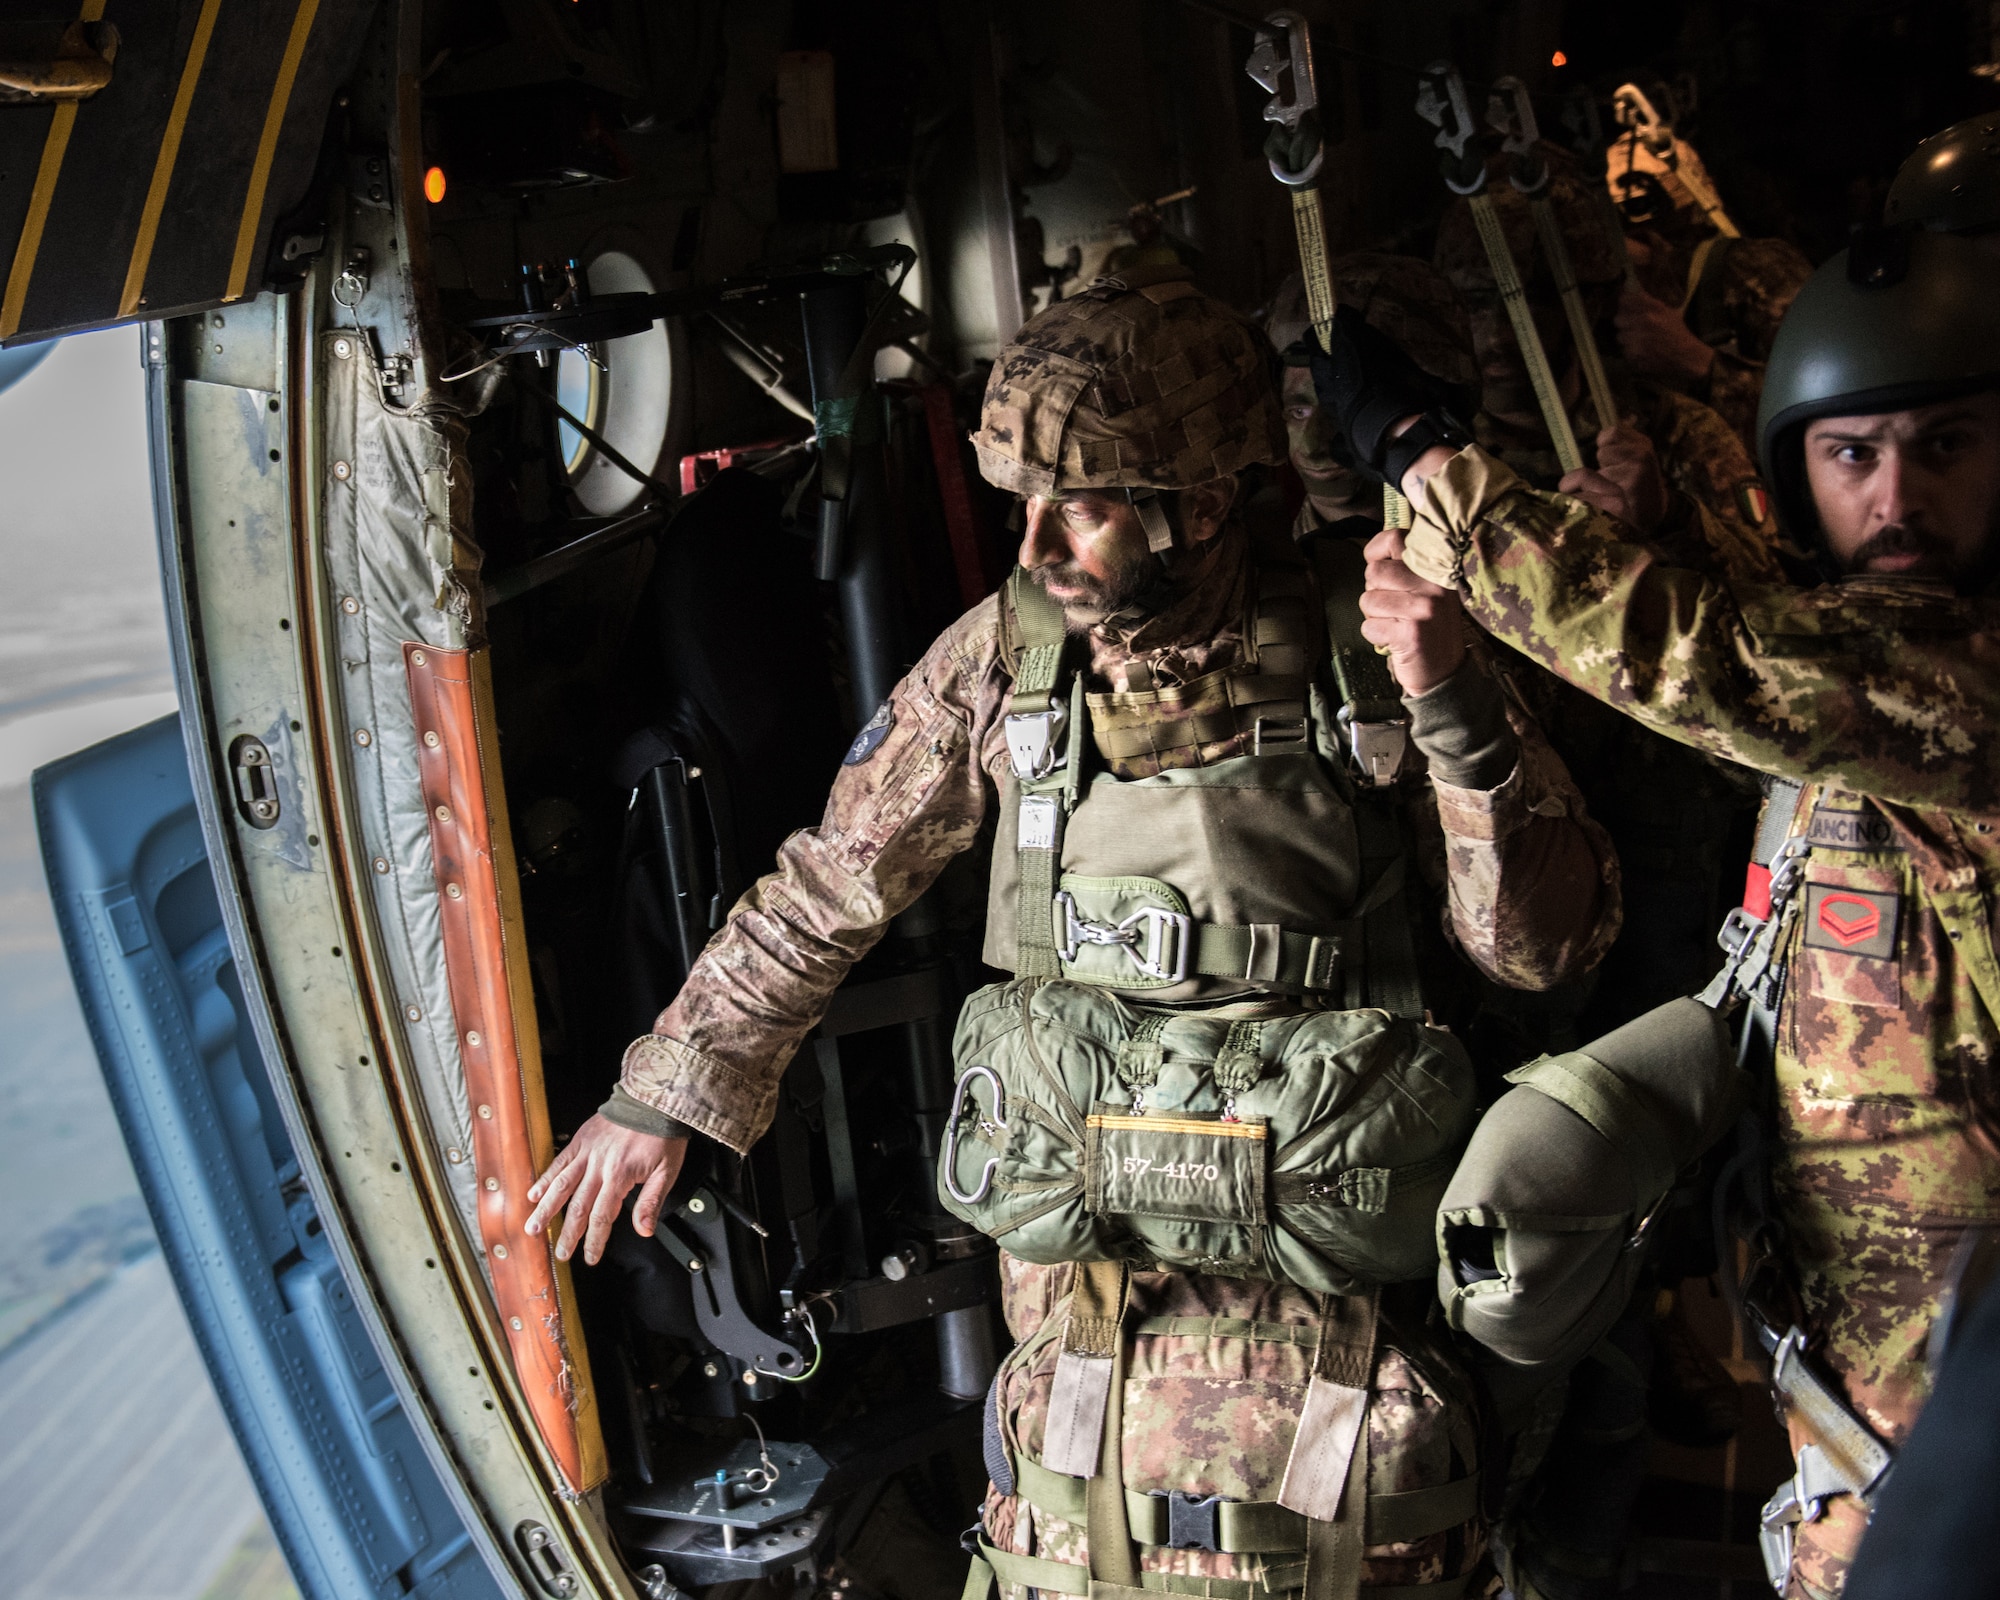 Members of the Italian Folgore, an airborne paratrooper brigade from the Italian Army, work to execute an airdrop mission alongside members of the Kentucky Air National Guard’s 123rd Airlift Wing in Pisa, Italy, Nov. 7, 2019. The mission was part of Mangusta 19, a bi-lateral exercise designed to promote readiness and interoperability among NATO allies. (U.S. Air National Guard photo by Senior Airman Chloe Ochs)